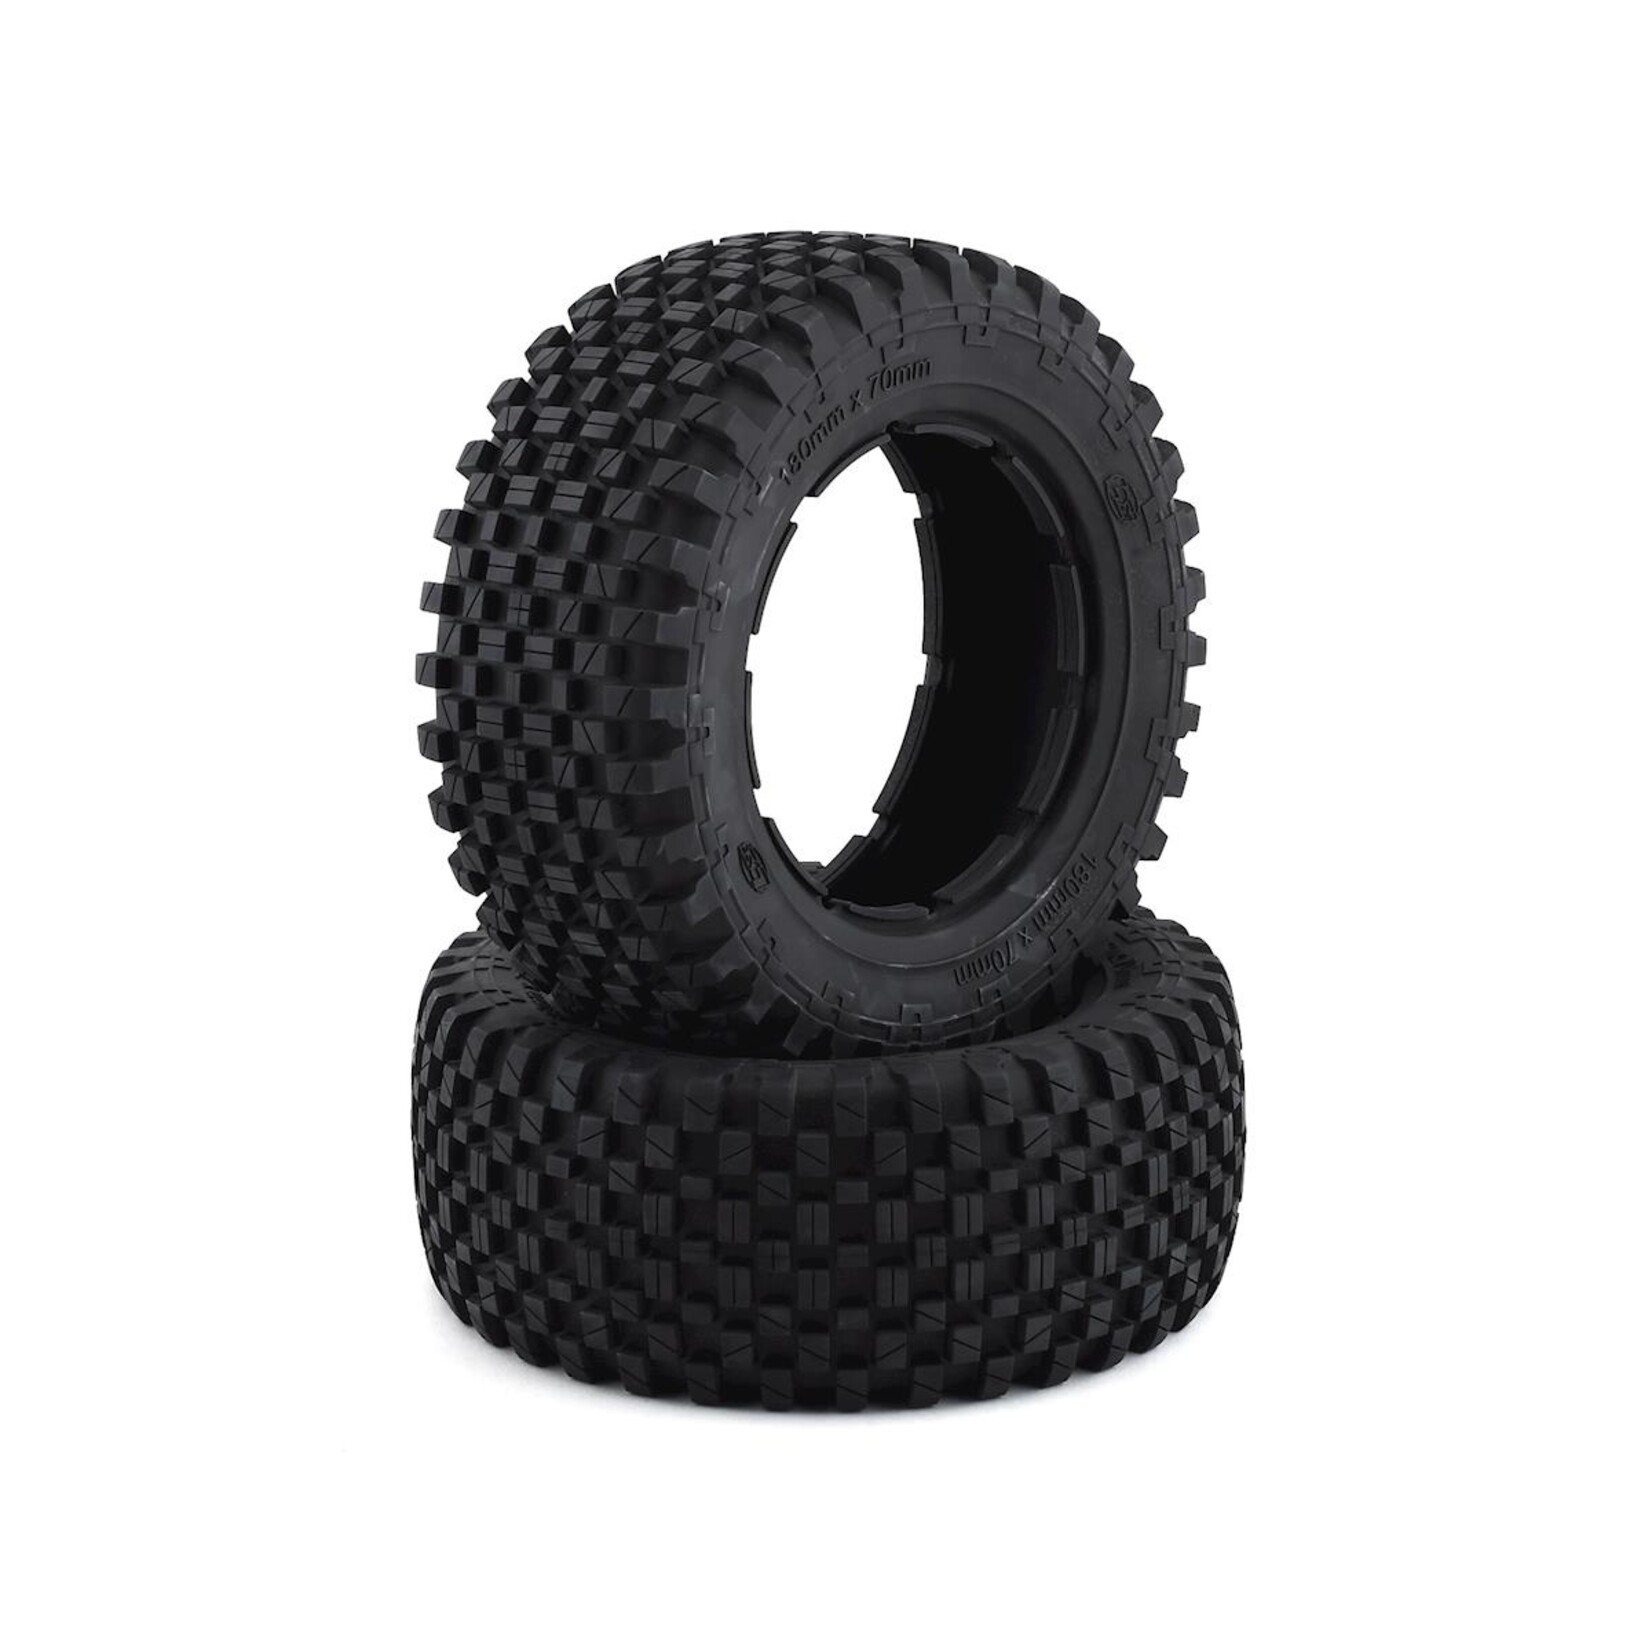 Losi Losi 5IVE-T 2.0 1/5 Scale Tire (Firm) (2) # LOS45023